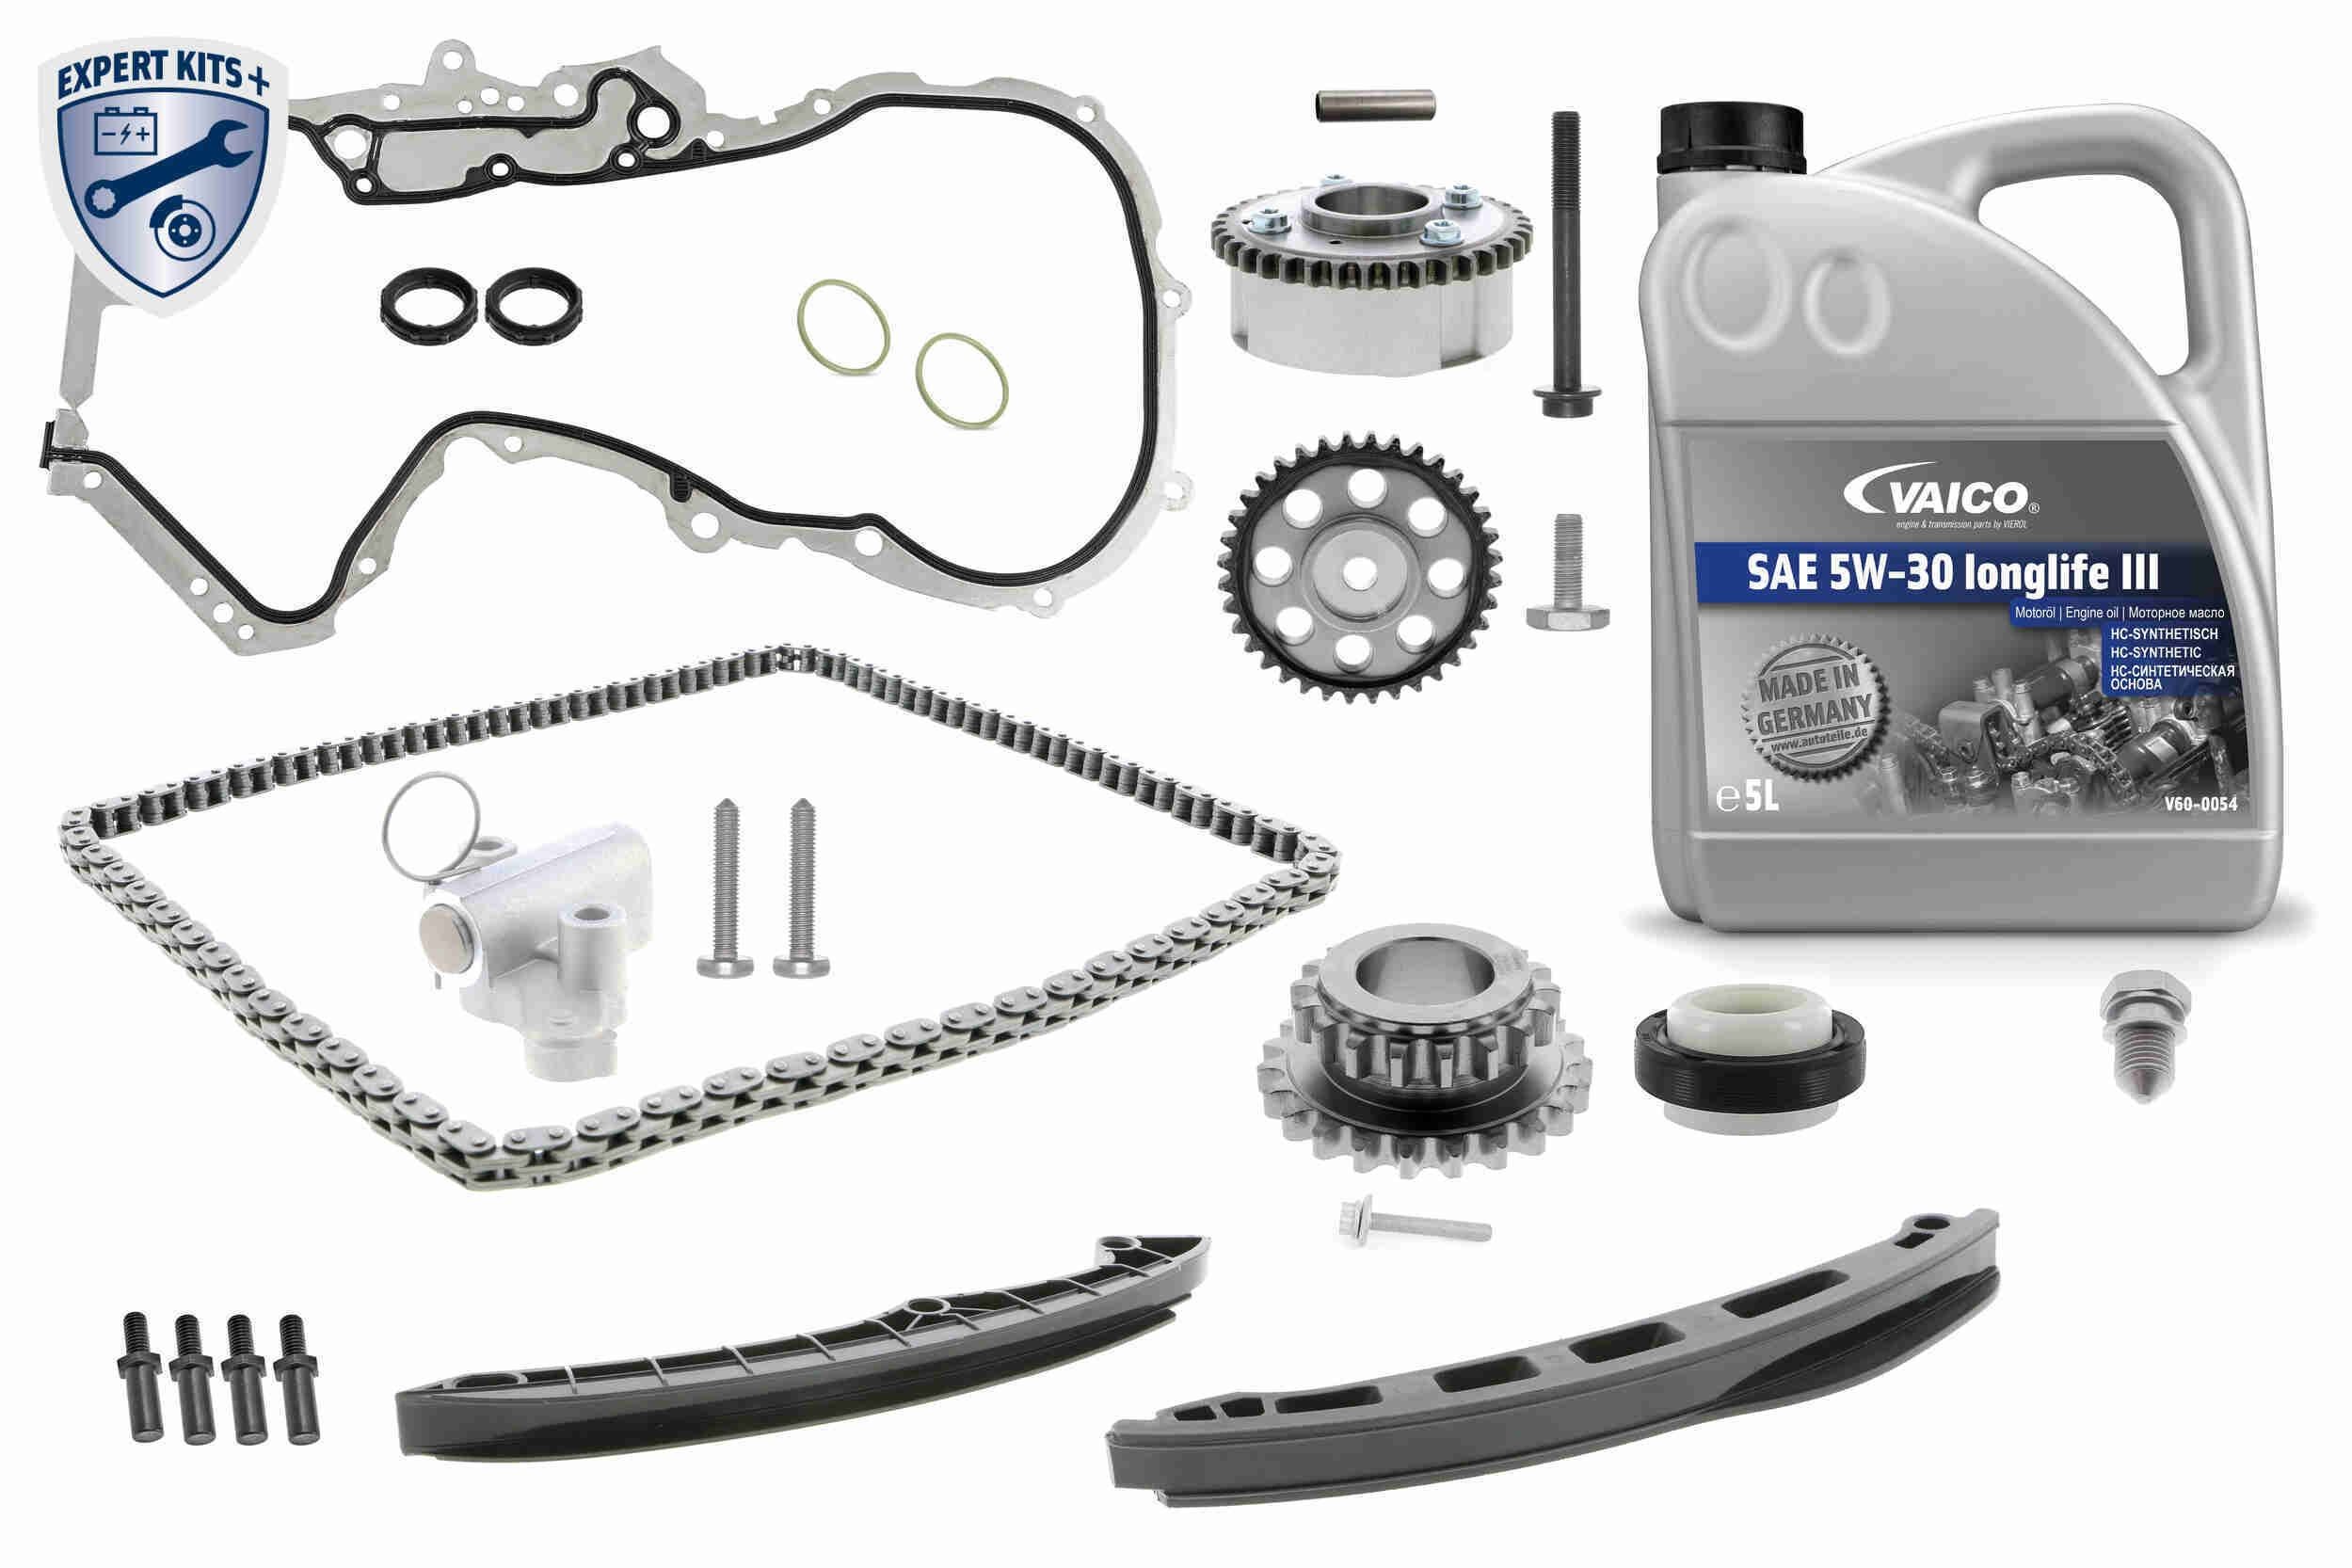 03C 109 158 A VAICO with accessories, with camshaft gear, with camshaft adjuster, with chain tensioner, with slide rails, with gaskets, with bolts/screws, for camshaft, with oil quantity for standard oil change, with control housing gasket, Closed chain, Silent Chain Timing chain set V10-10026 buy